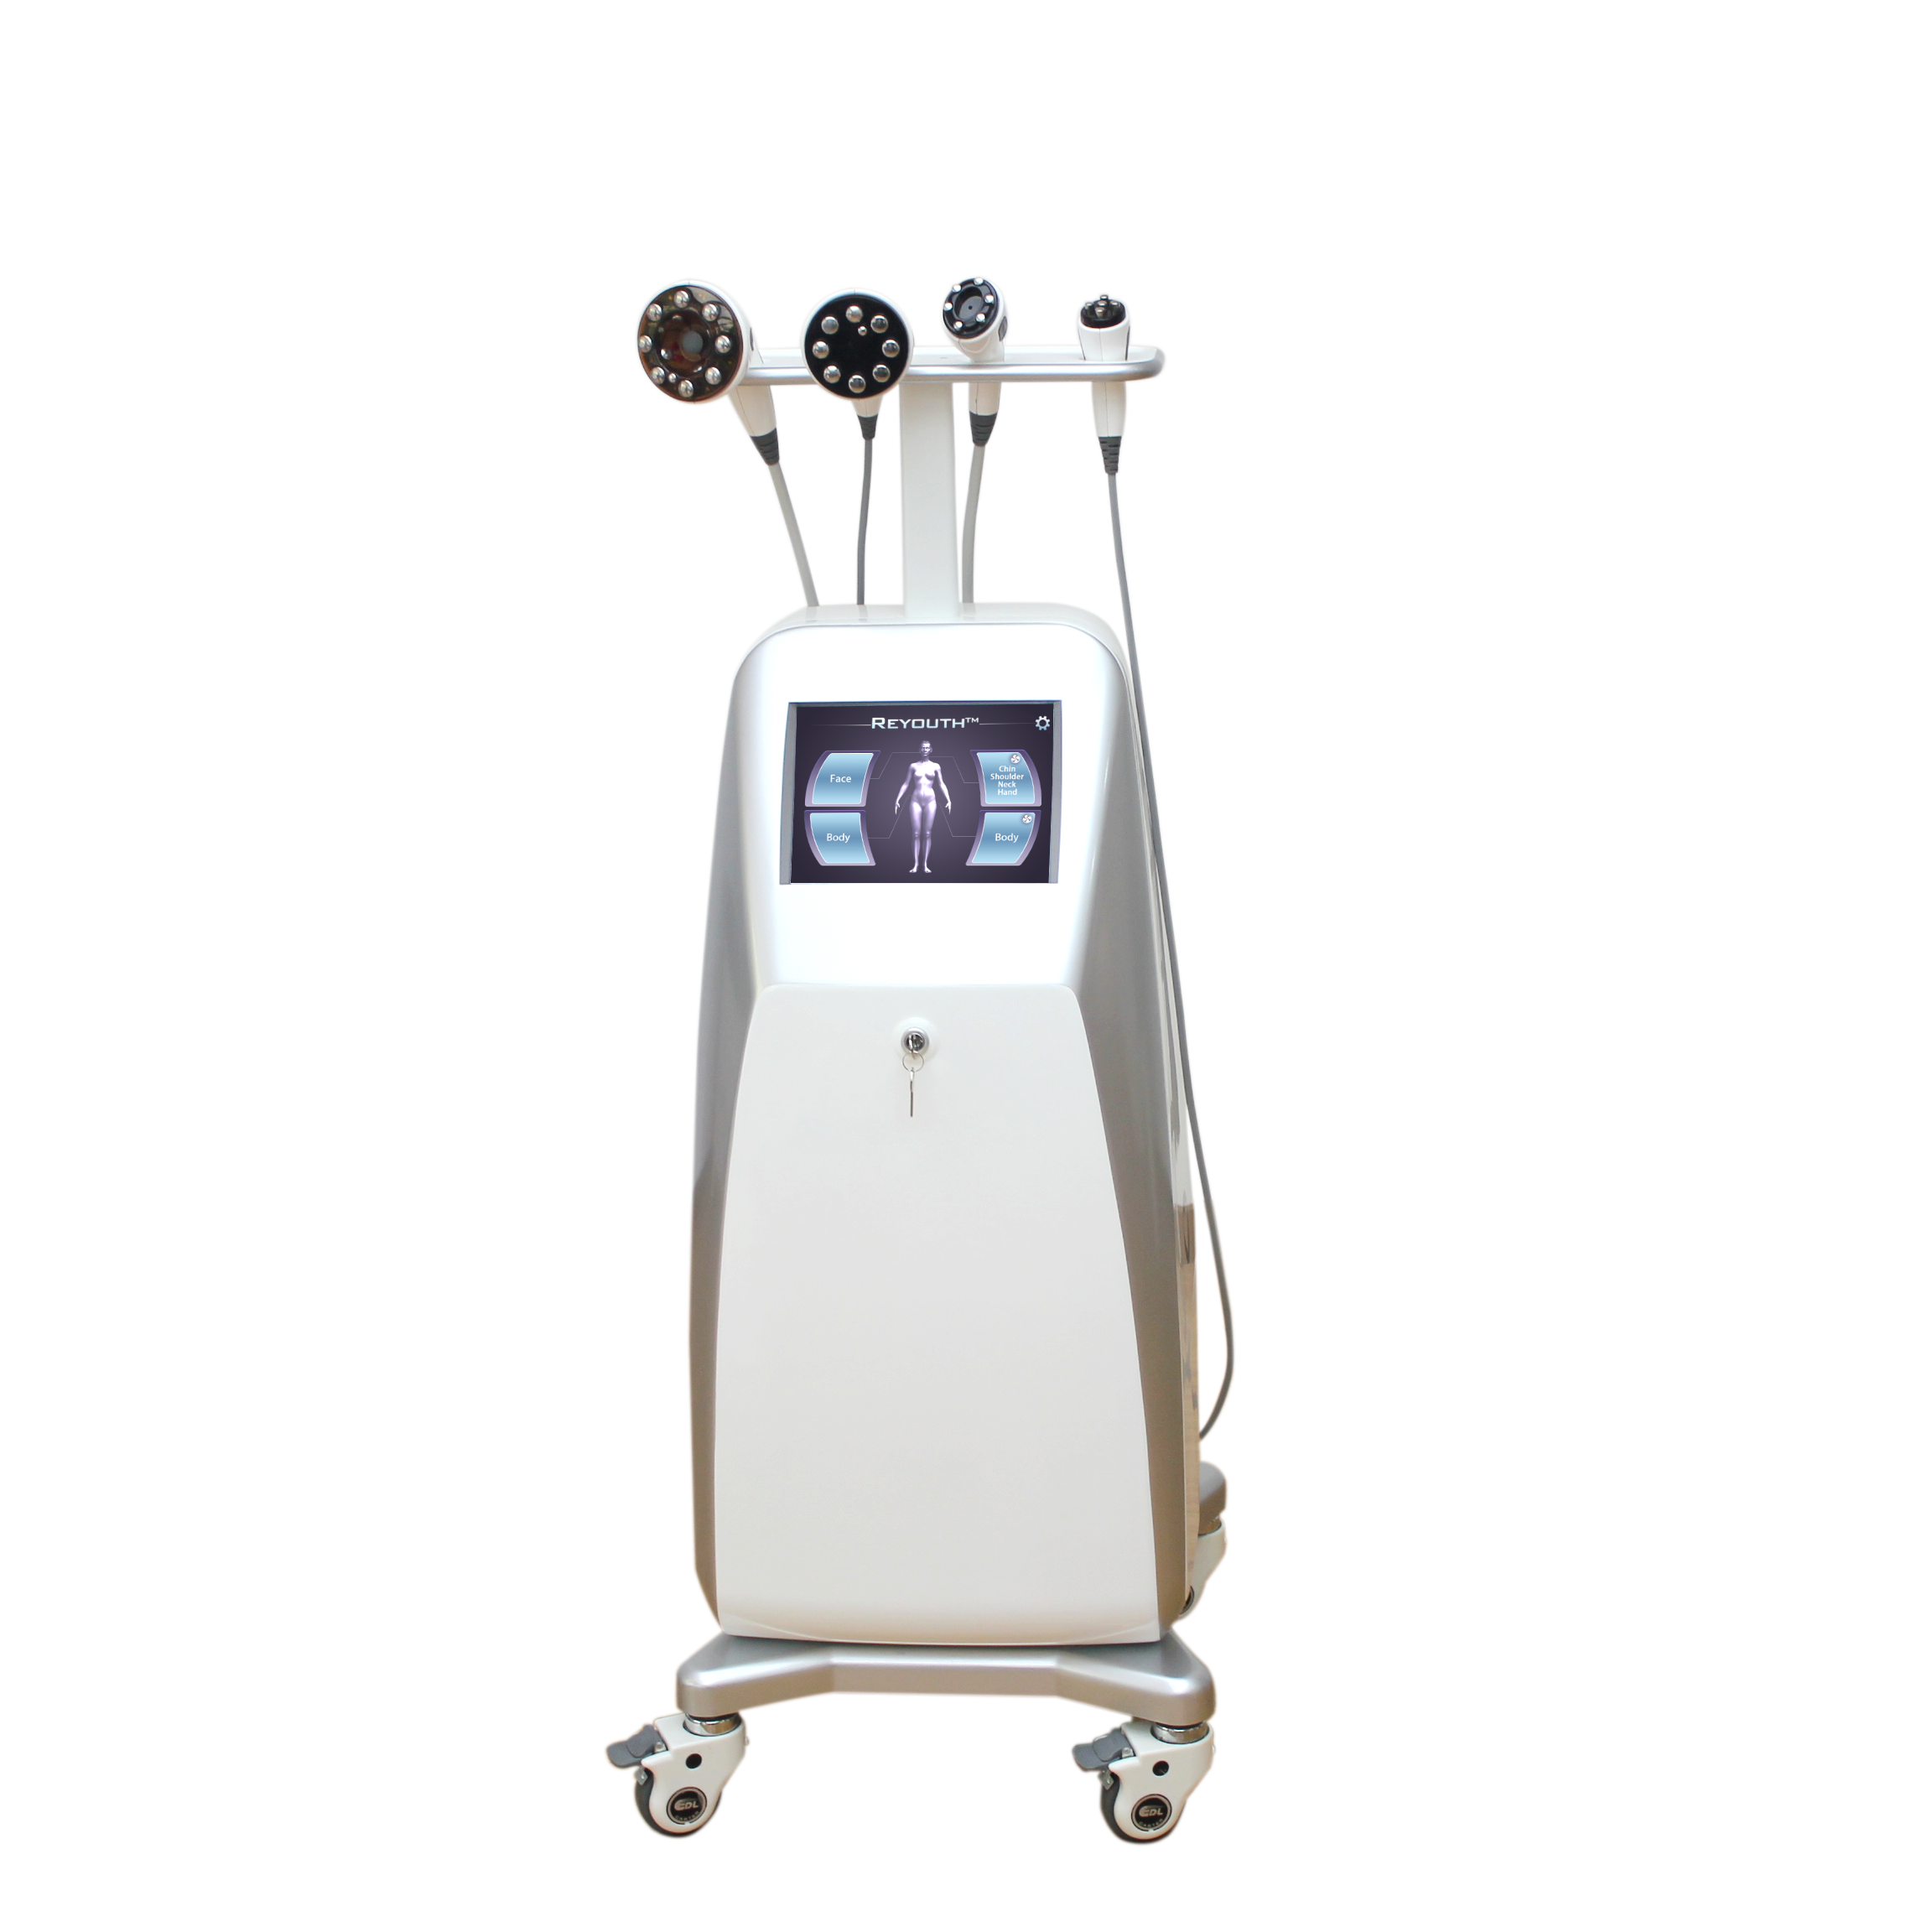 Venus Legacy anti-aging Multi frequency modes Radio Frequency, LED, Vacuum, slimming, Body contouring machine